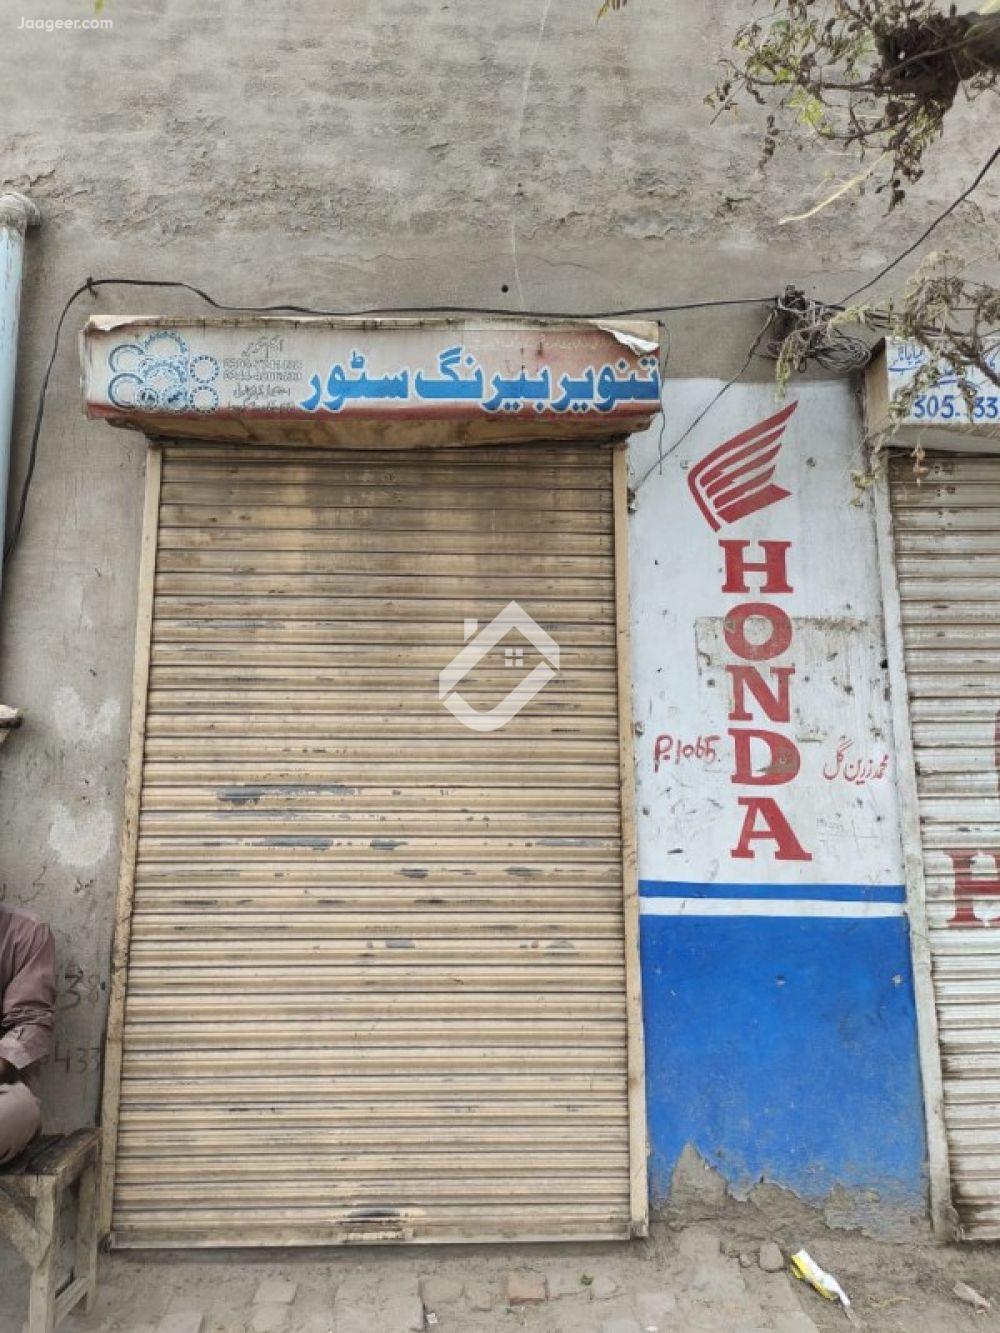 View  250 Sqft Commercial Shop Is For Sale In Istaqlalabad in Istaqlalabad, Sargodha